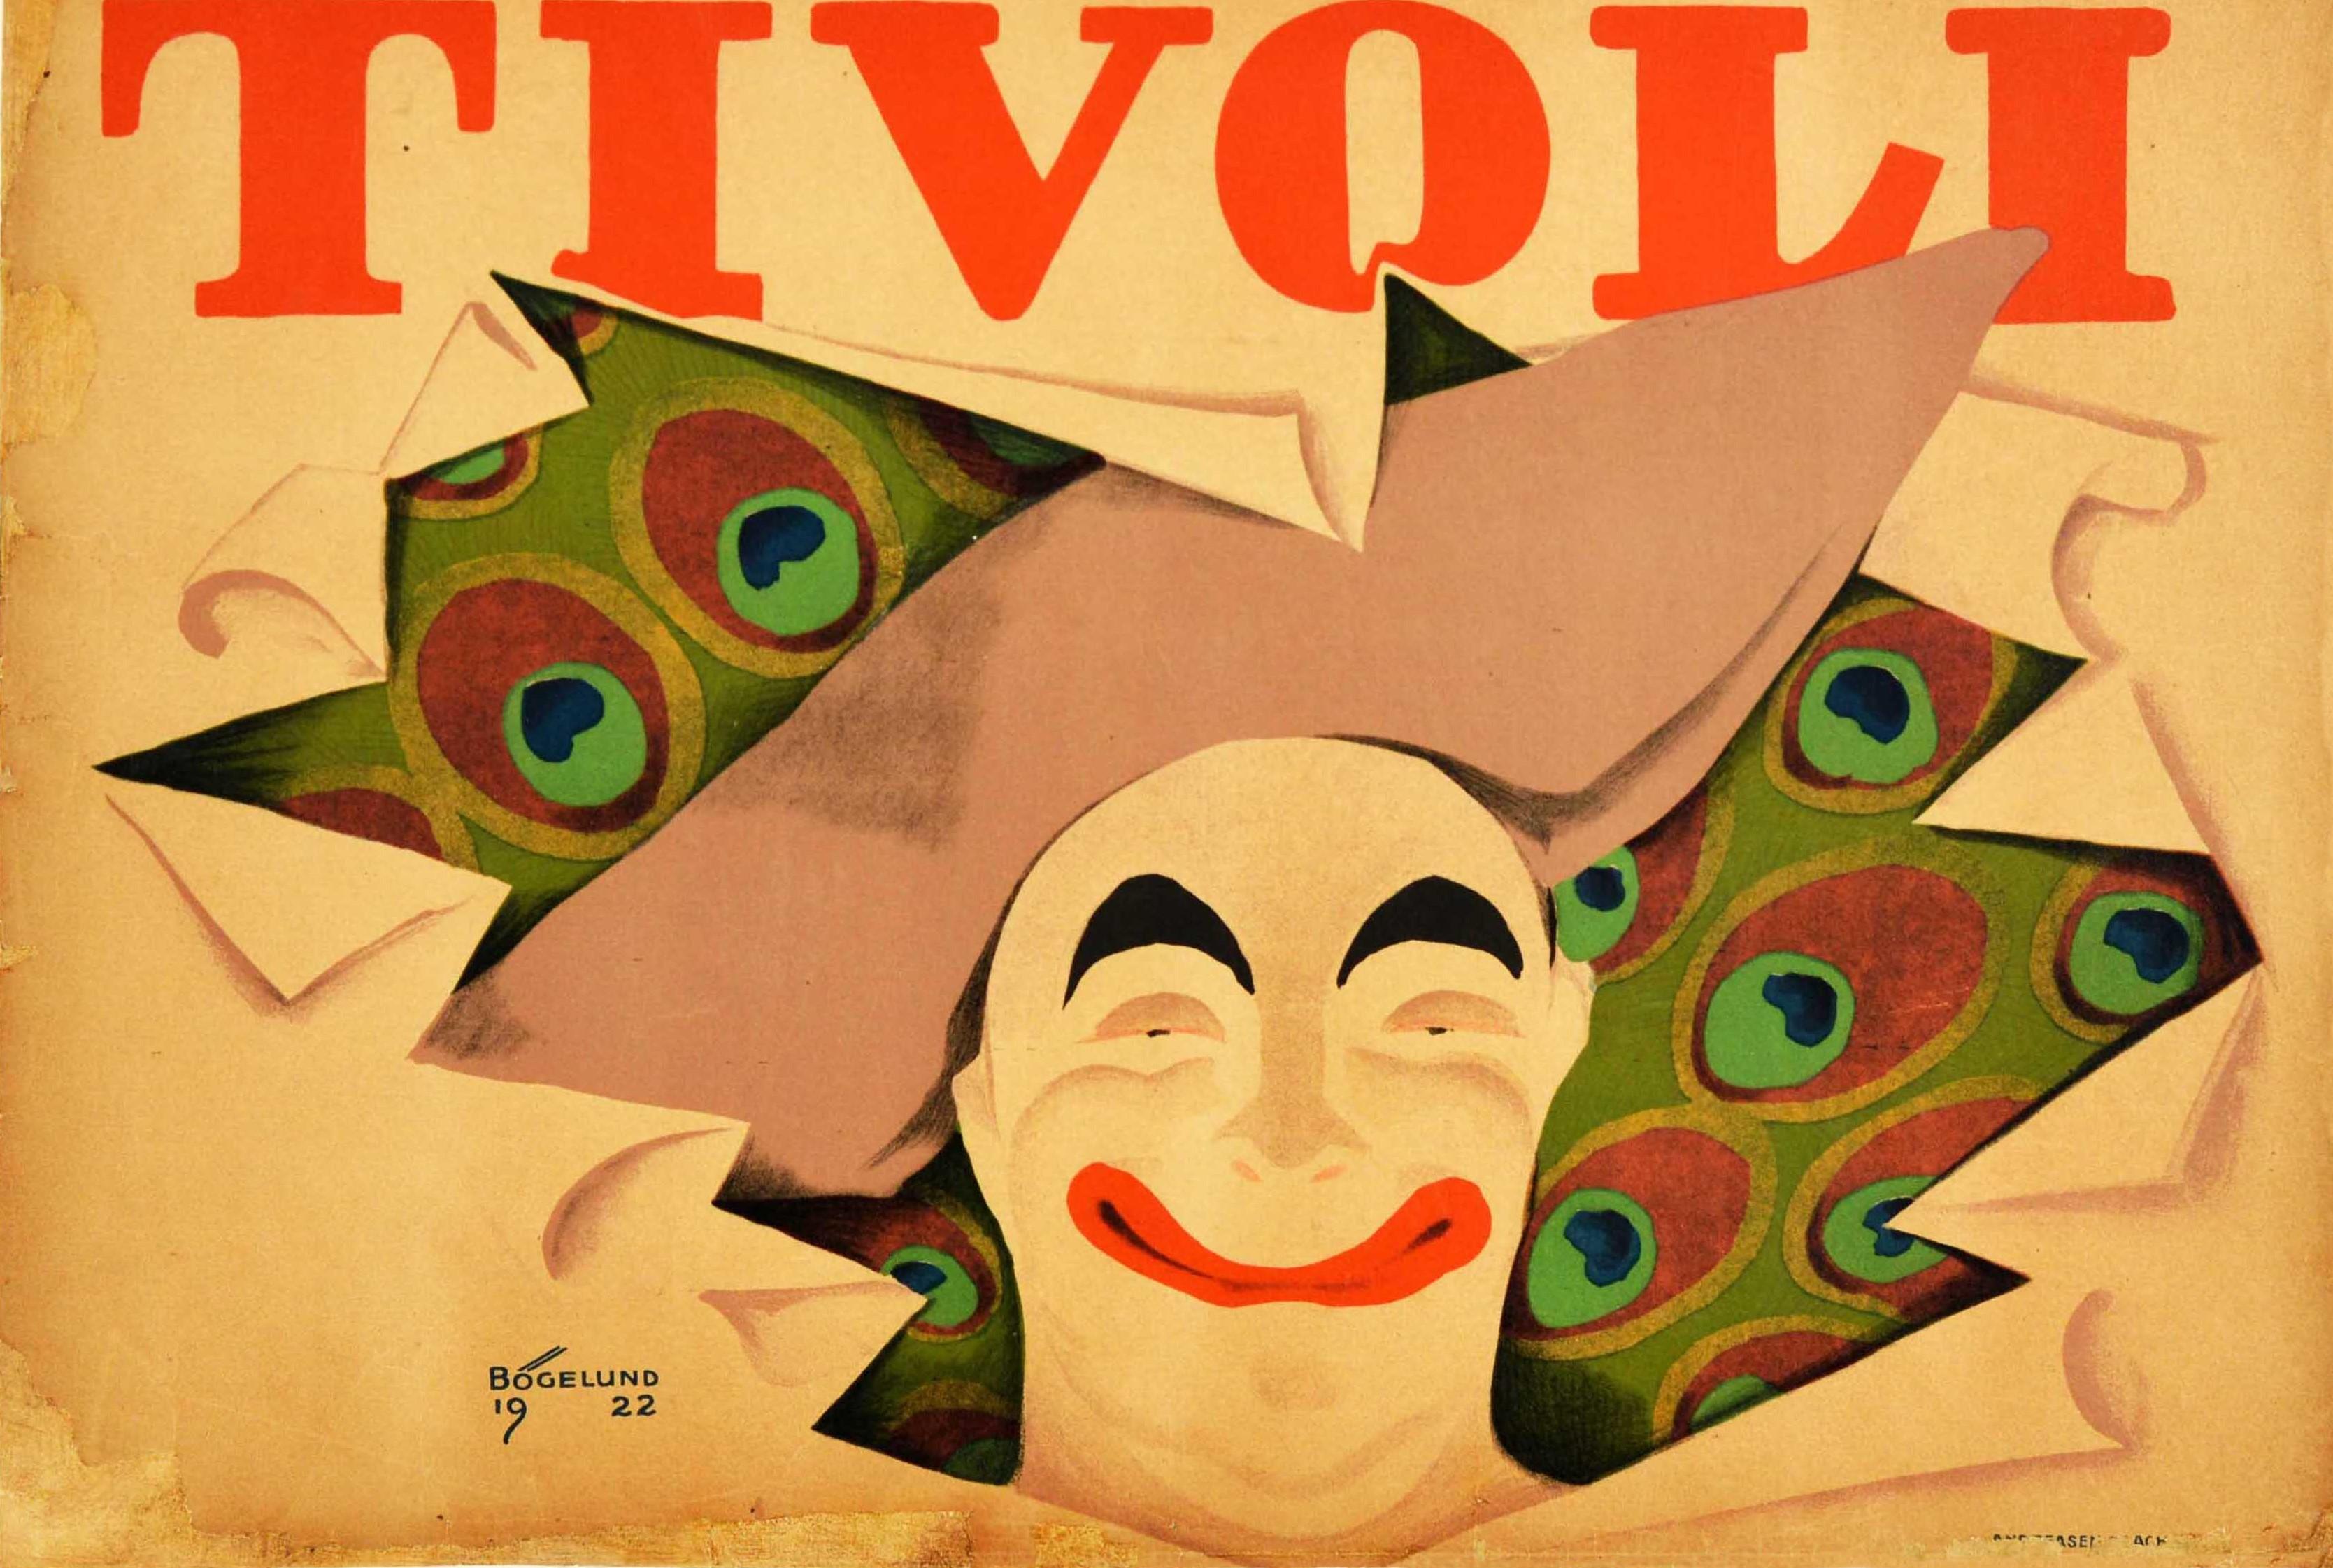 Original antique poster for the world's second-oldest amusement park - Tivoli - featuring a fantastic illustration of a smiling clown in a hat looking at the viewer through a torn Tivoli advertisement poster with a peacock feather background and the